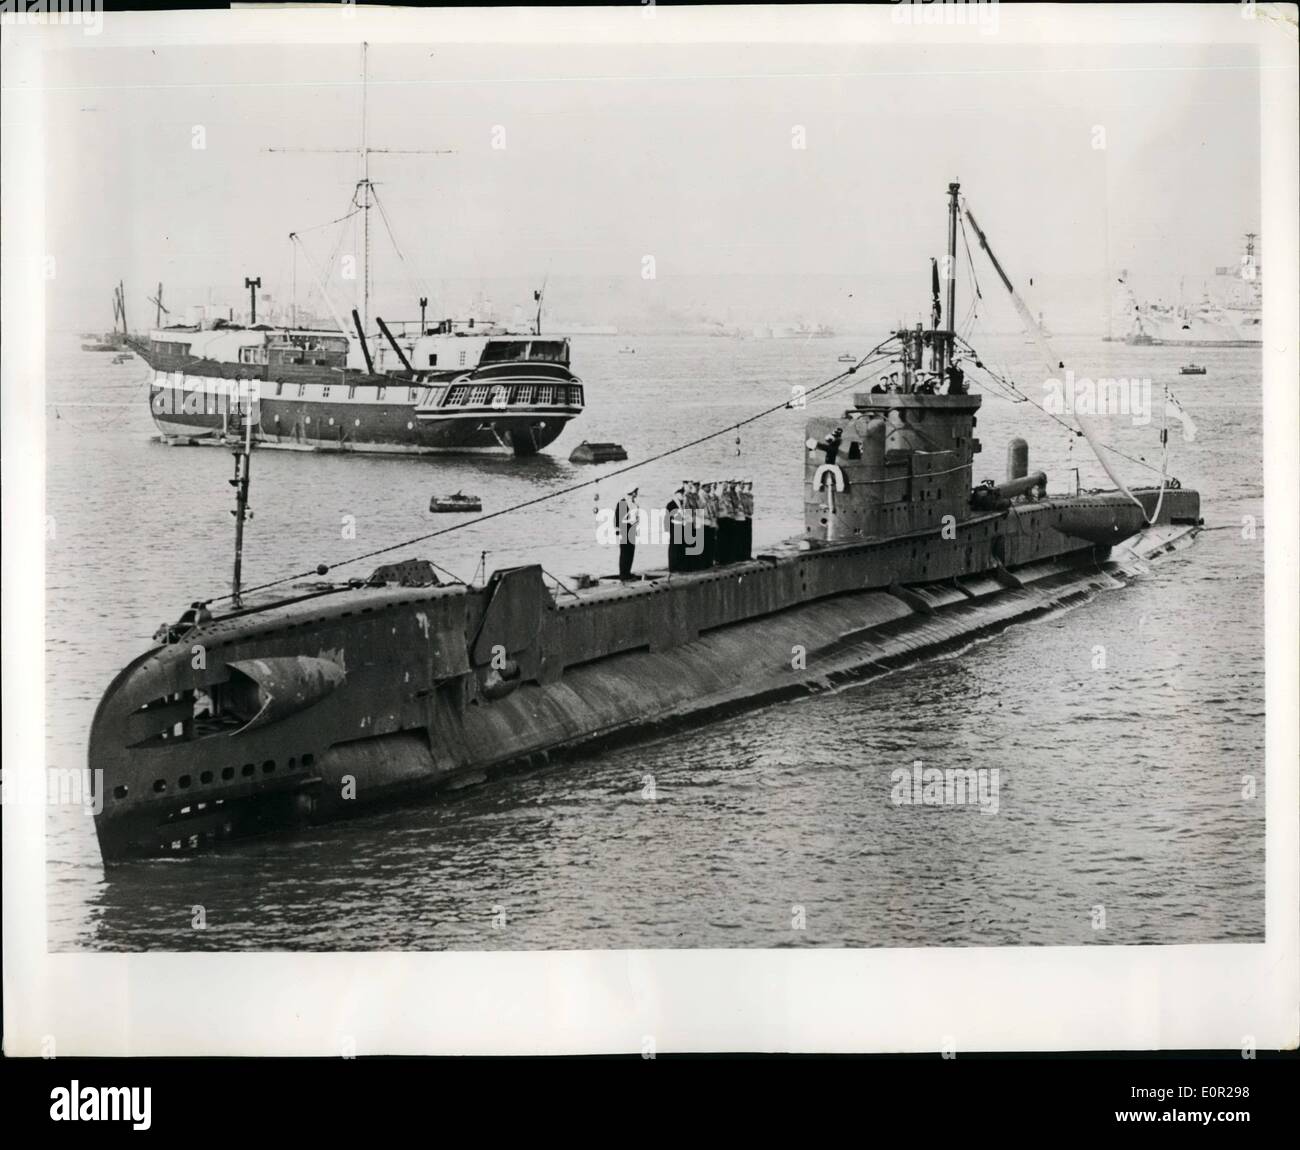 Dec. 12, 1957 - Round-The -world Submarine Home after eight years: H.M.S. Through (1,090 Long tons) is believed to be the first Stock Photo